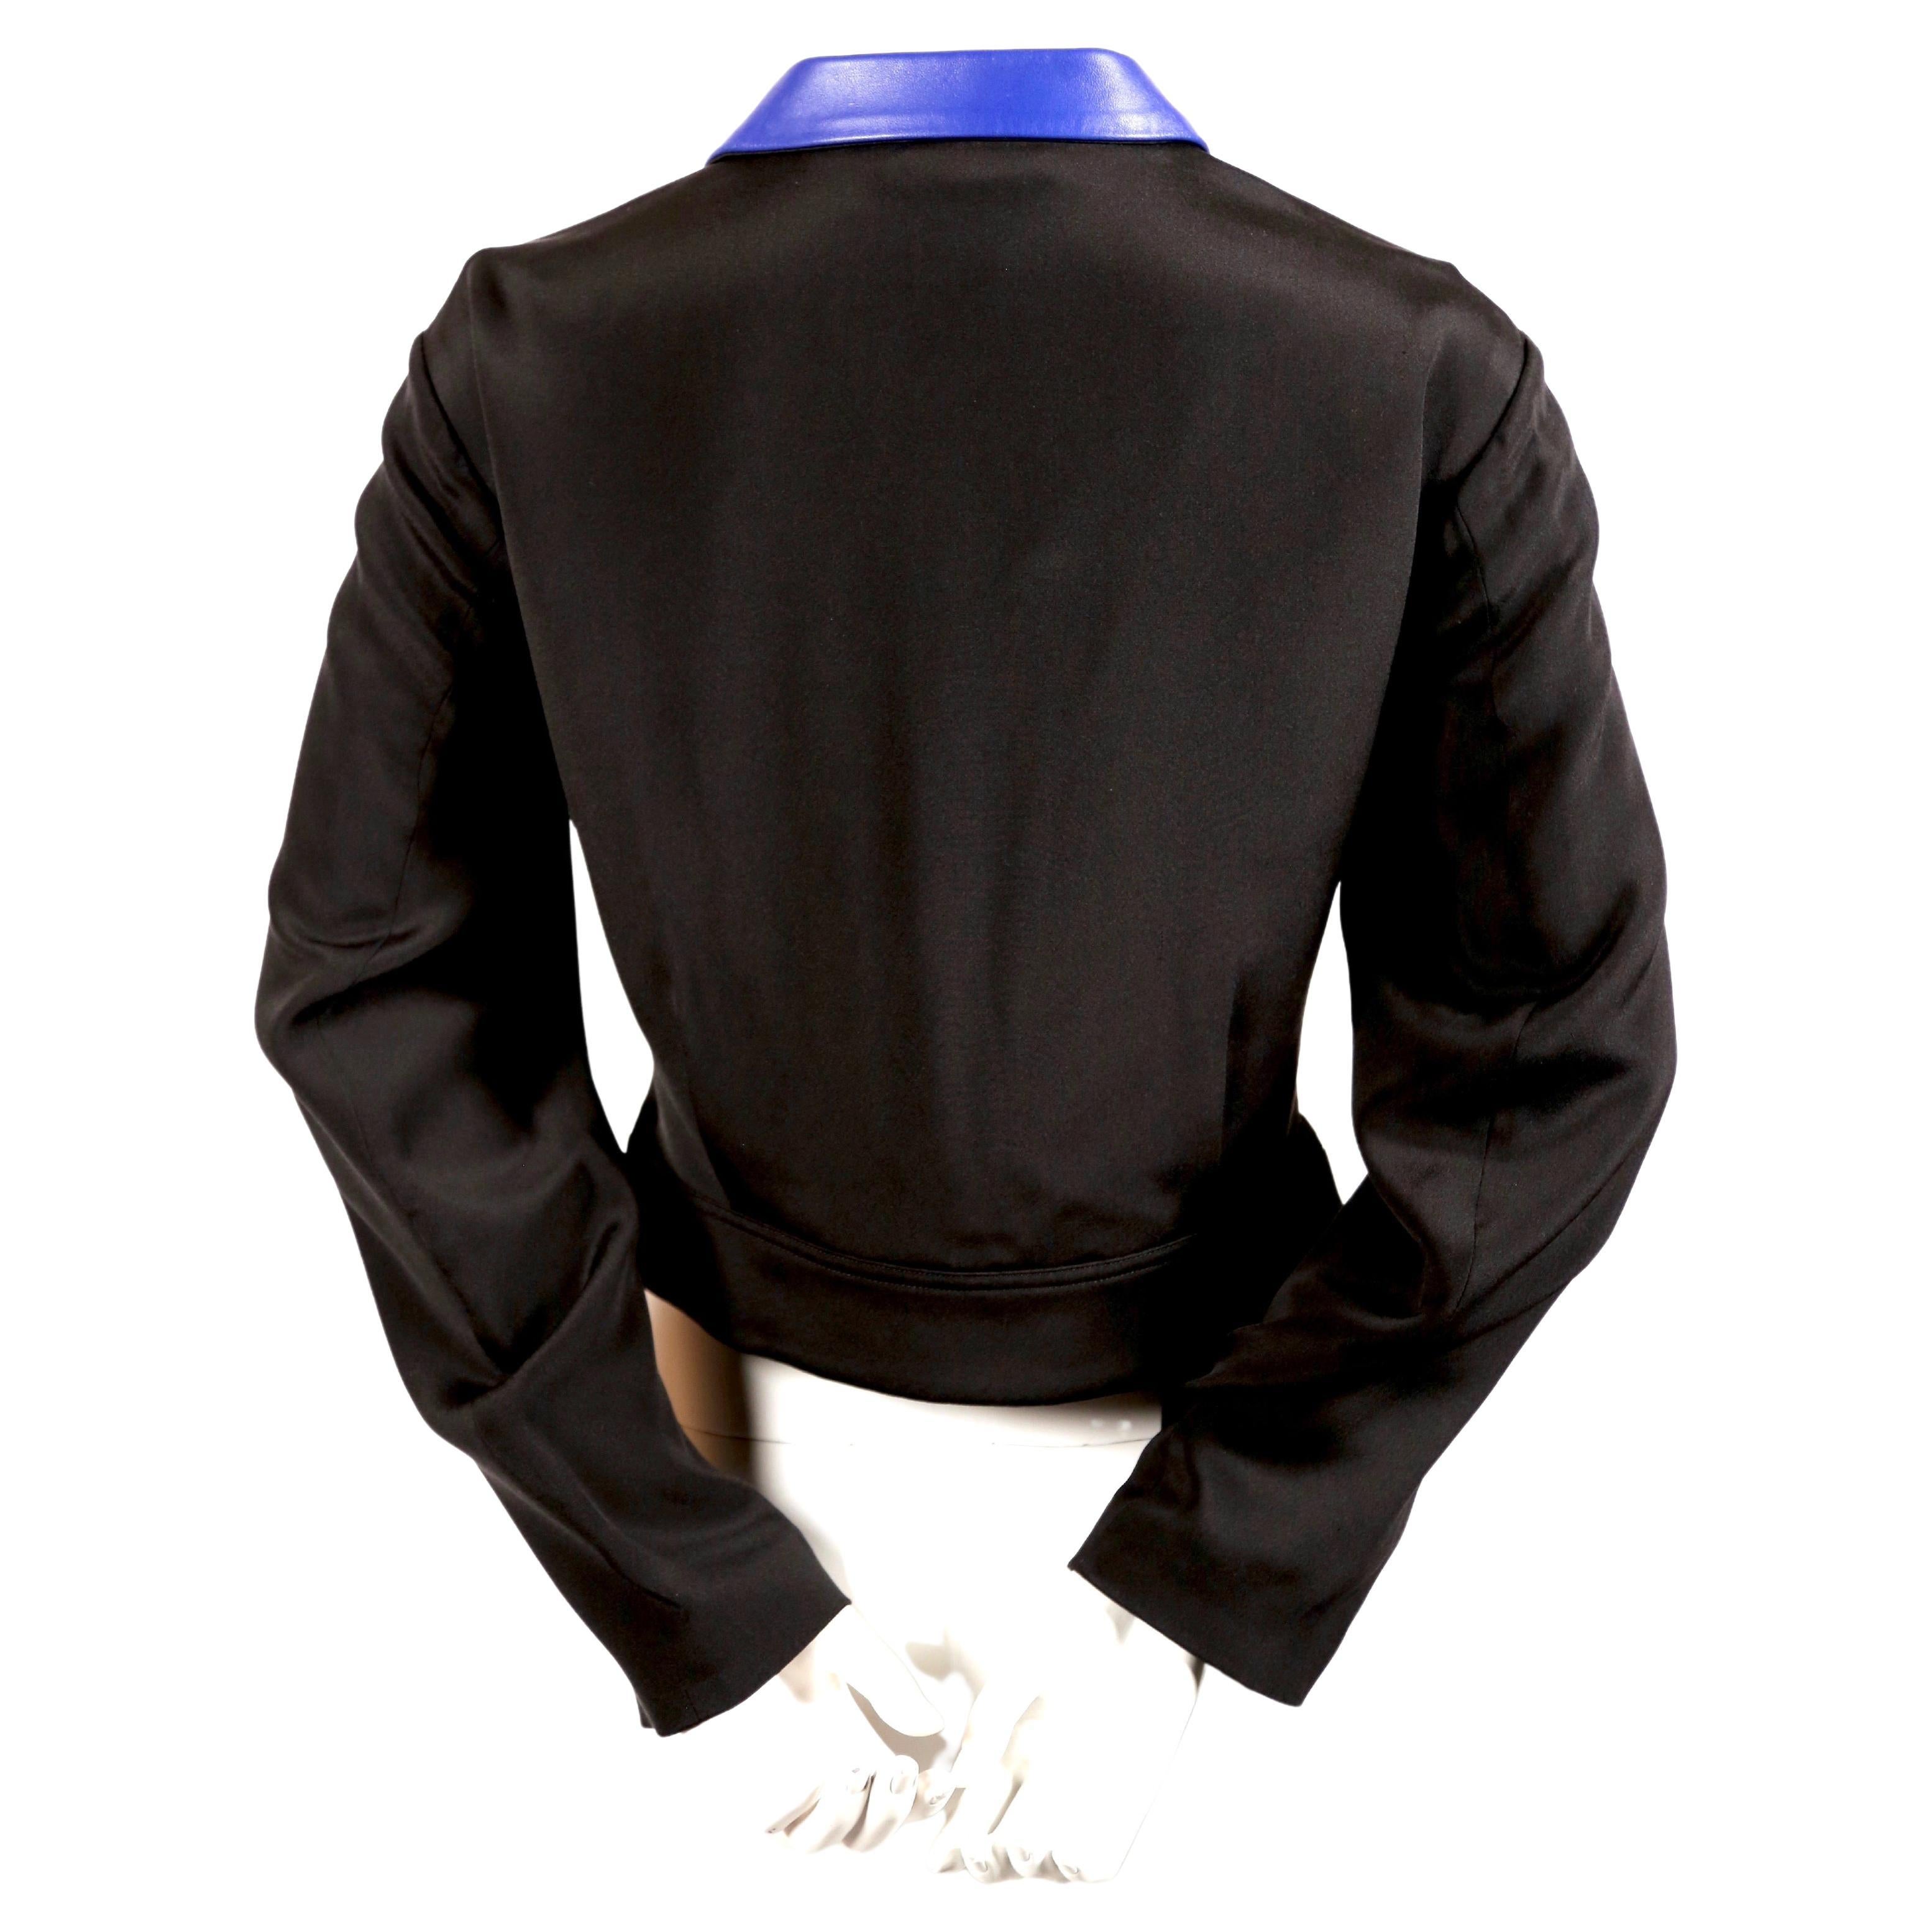 Blue 2007 YOHJI YAMAMOTO blue leather runway jacket with forced front   - NEW For Sale